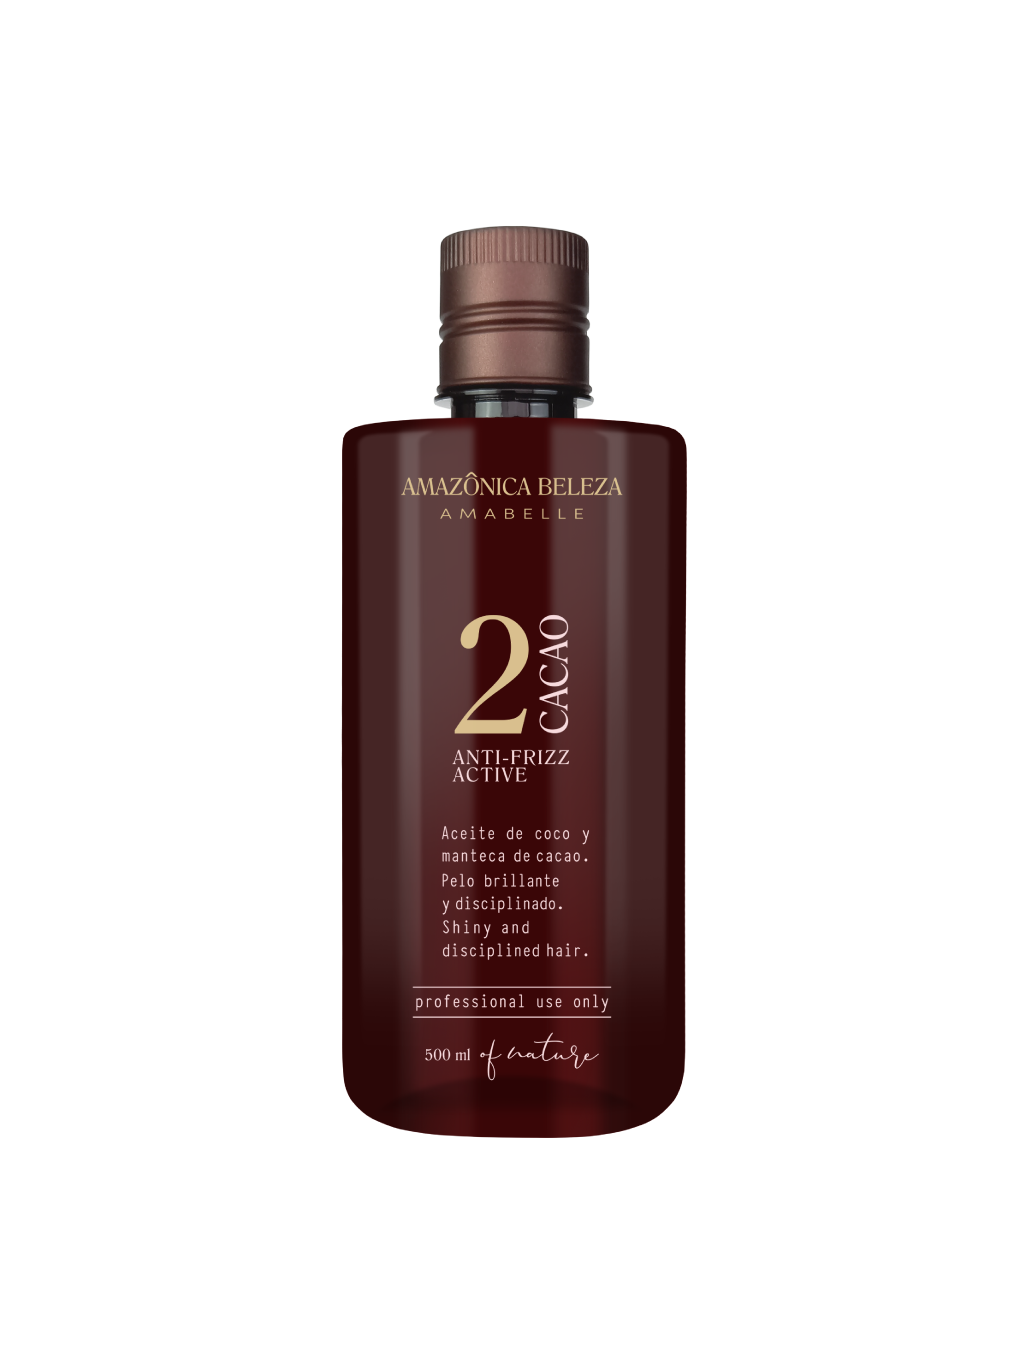 Keratin Step 2, Cacao Anti-Frizz Active, for Damaged Hair